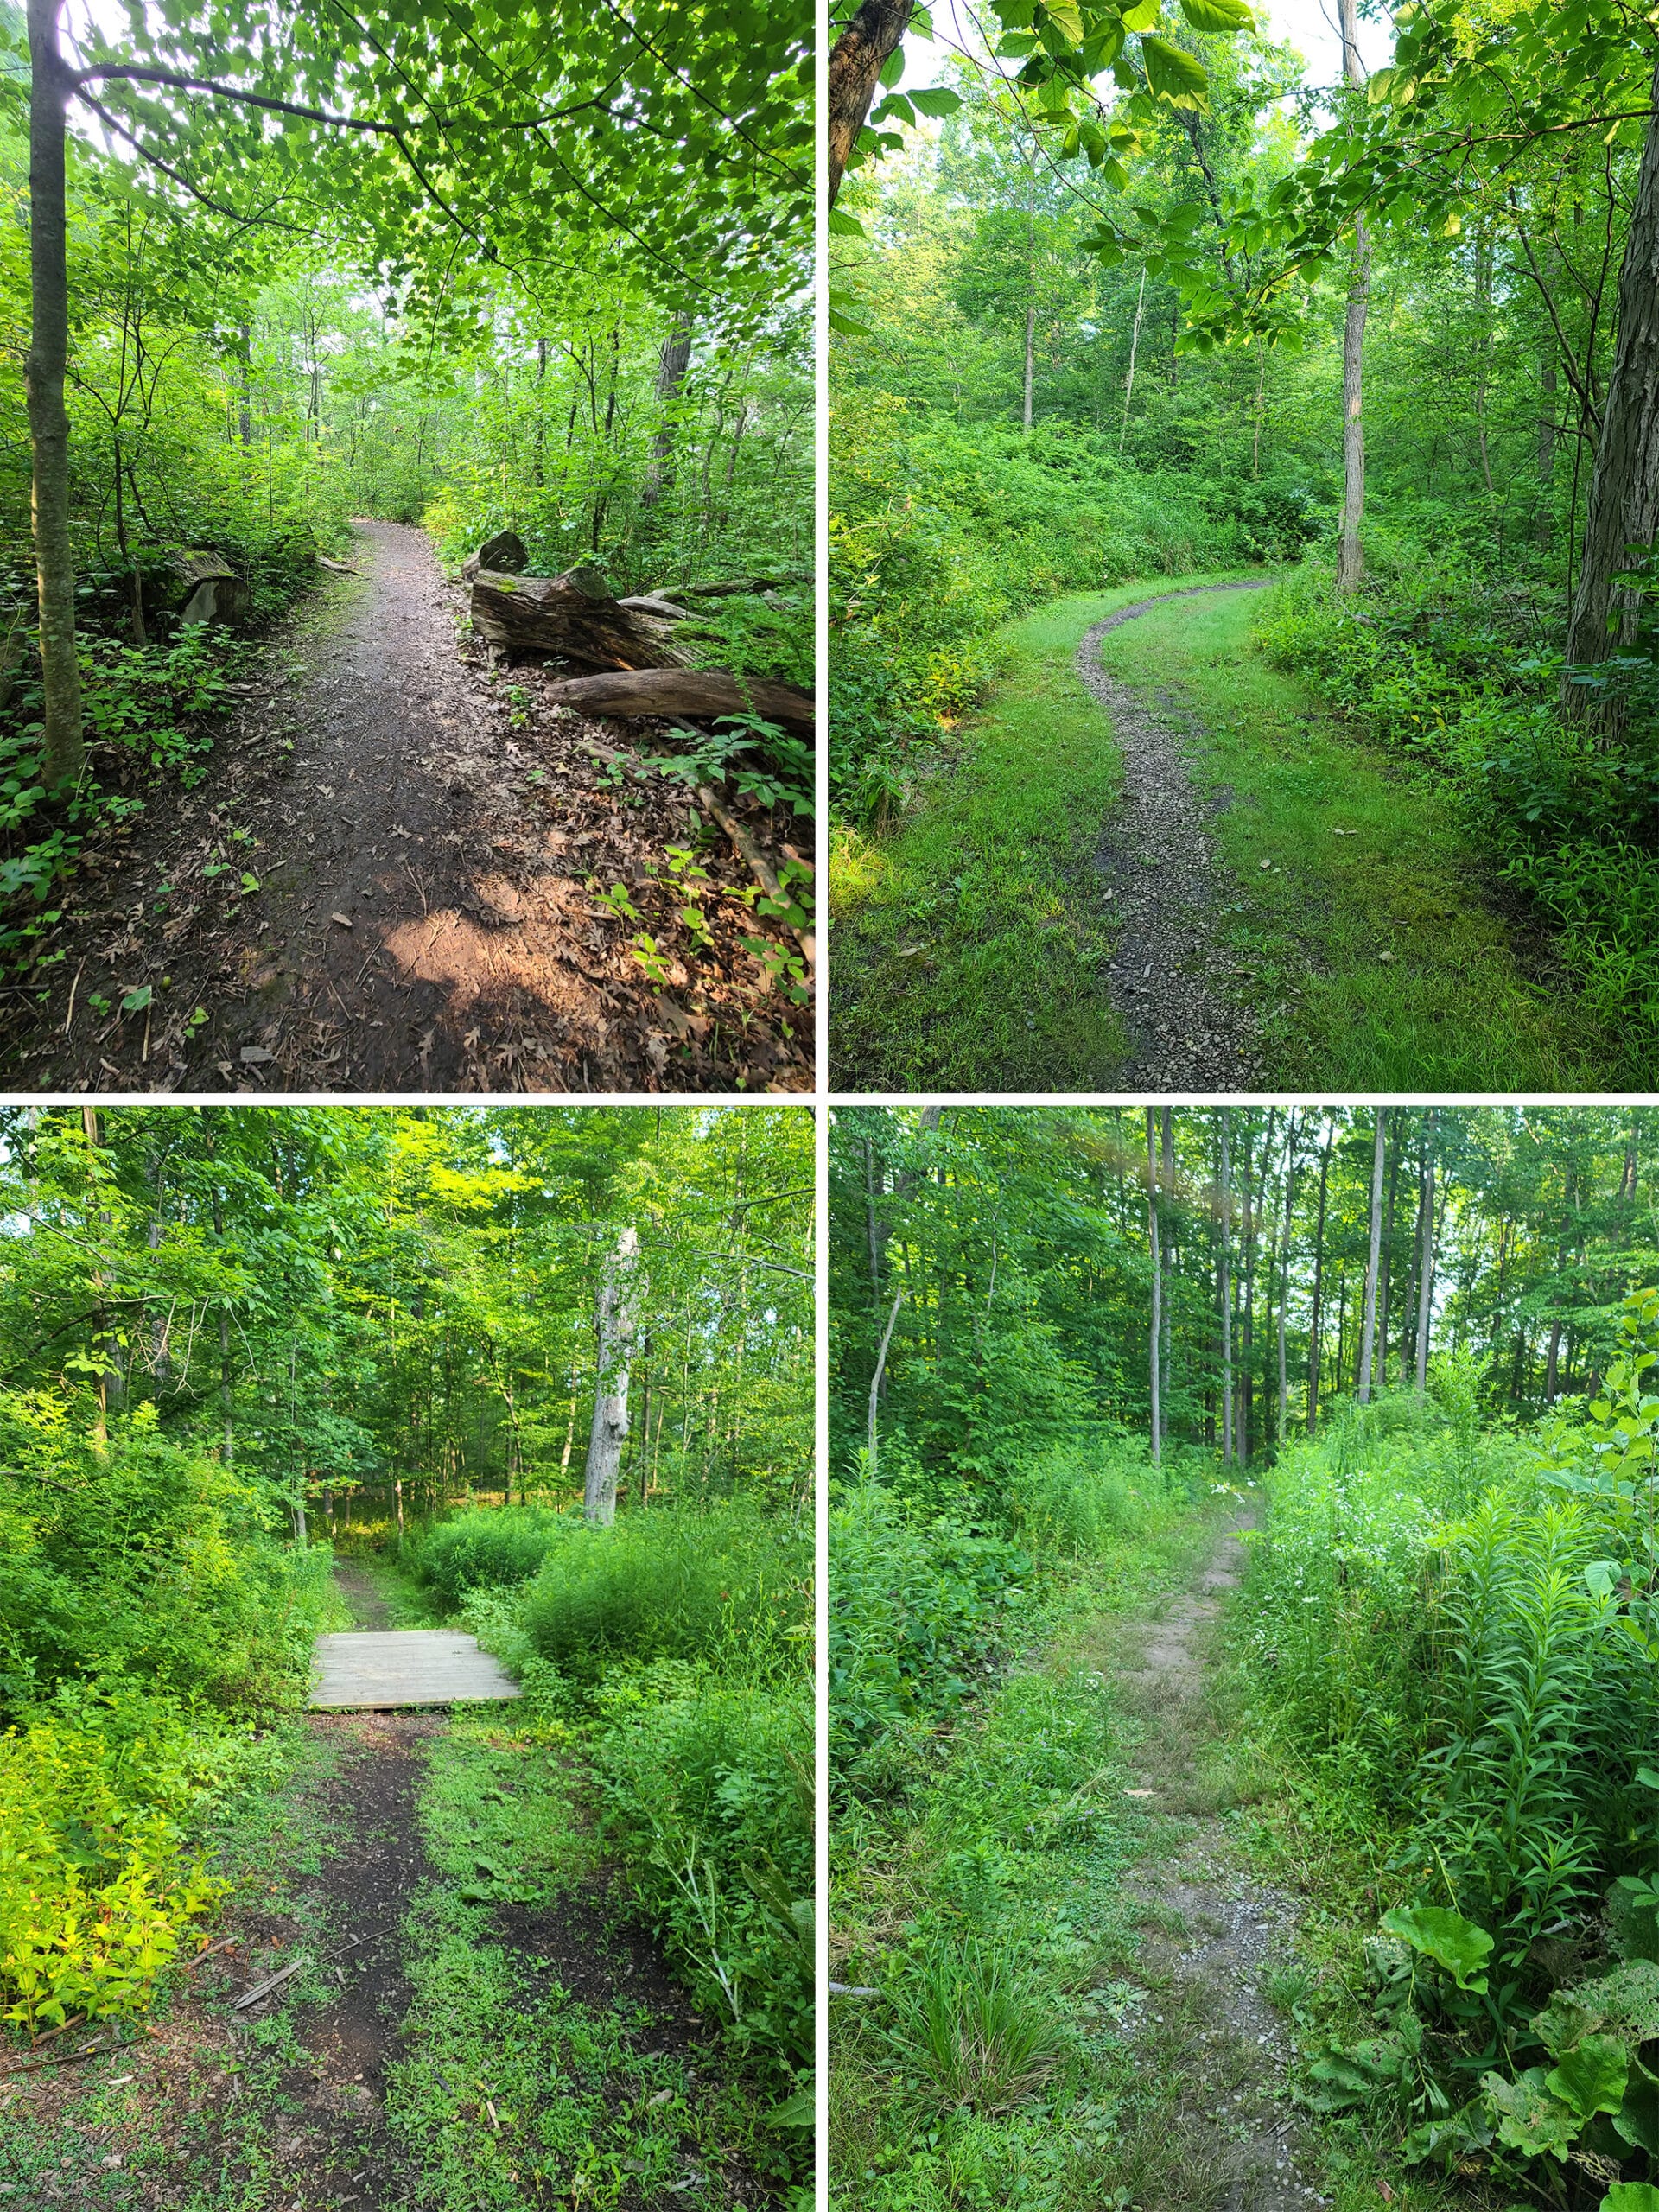 4 part image showing various views of Wheeler's Walk Trail - unpaved, varying widths.